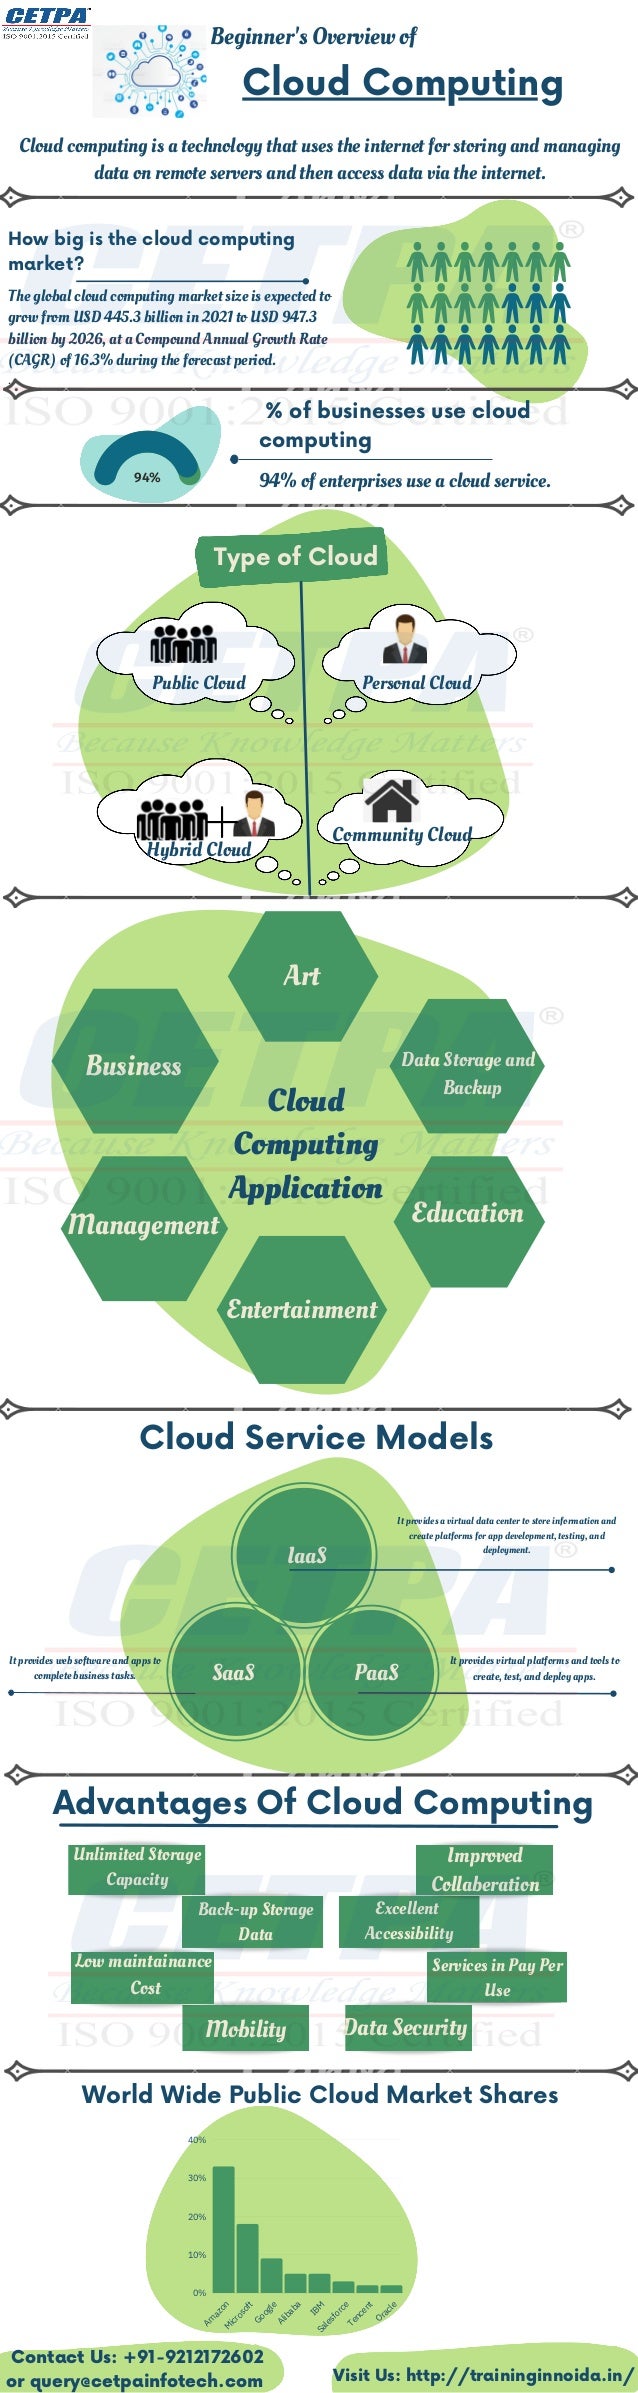 94%
The global cloud computing market size is expected to
grow from USD 445.3 billion in 2021 to USD 947.3
billion by 2026, at a Compound Annual Growth Rate
(CAGR) of 16.3% during the forecast period.
.
How big is the cloud computing
market?
94% of enterprises use a cloud service.
% of businesses use cloud
computing
IaaS
Cloud computing is a technology that uses the internet for storing and managing
data on remote servers and then access data via the internet.


Art
Management
Business Data Storage and
Backup
Education
Cloud
Computing
Application
Public Cloud Personal Cloud
SaaS PaaS
It provides a virtual data center to store information and
create platforms for app development, testing, and
deployment.
It provides web software and apps to
complete business tasks.
It provides virtual platforms and tools to
create, test, and deploy apps.
Unlimited Storage
Capacity
Back-up Storage
Data
Services in Pay Per
Use
Data Security
Mobility
Excellent
Accessibility
Low maintainance
Cost
Improved
Collaberation
Contact Us: +91-9212172602
or query@cetpainfotech.com
A
m
a
z
o
n
M
i
c
r
o
s
o
f
t
G
o
o
g
l
e
A
l
i
b
a
b
a
I
B
M
S
a
l
e
s
f
o
r
c
e
T
e
n
c
e
n
t
O
r
a
c
l
e
40%
30%
20%
10%
0%
Cloud Computing
Beginner's Overview of
Entertainment
Type of Cloud
Community Cloud
Hybrid Cloud
Cloud Service Models
Advantages Of Cloud Computing
World Wide Public Cloud Market Shares
Visit Us: http://traininginnoida.in/
 